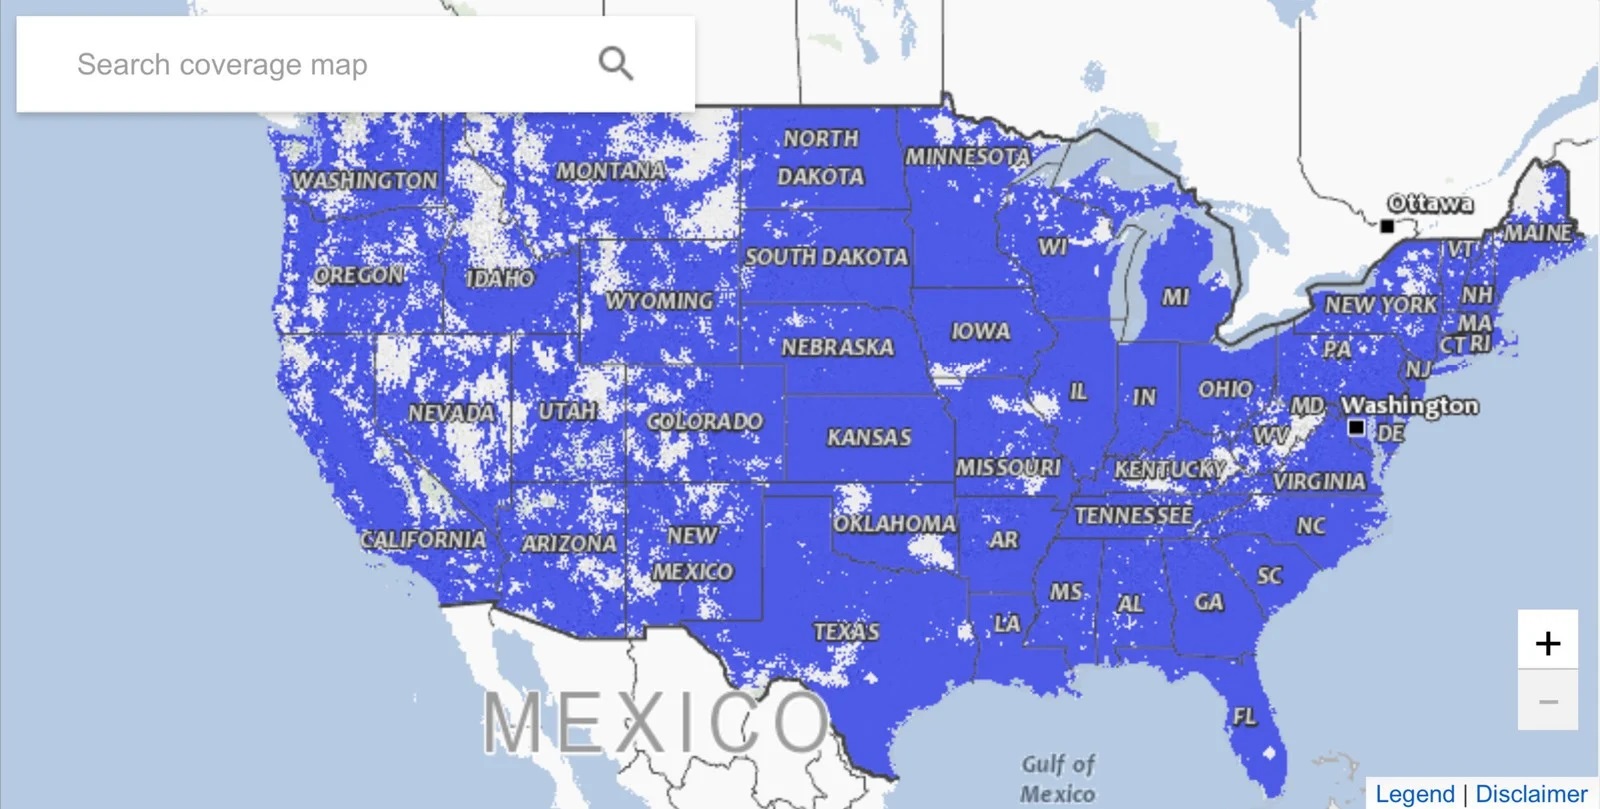 visible coverage map